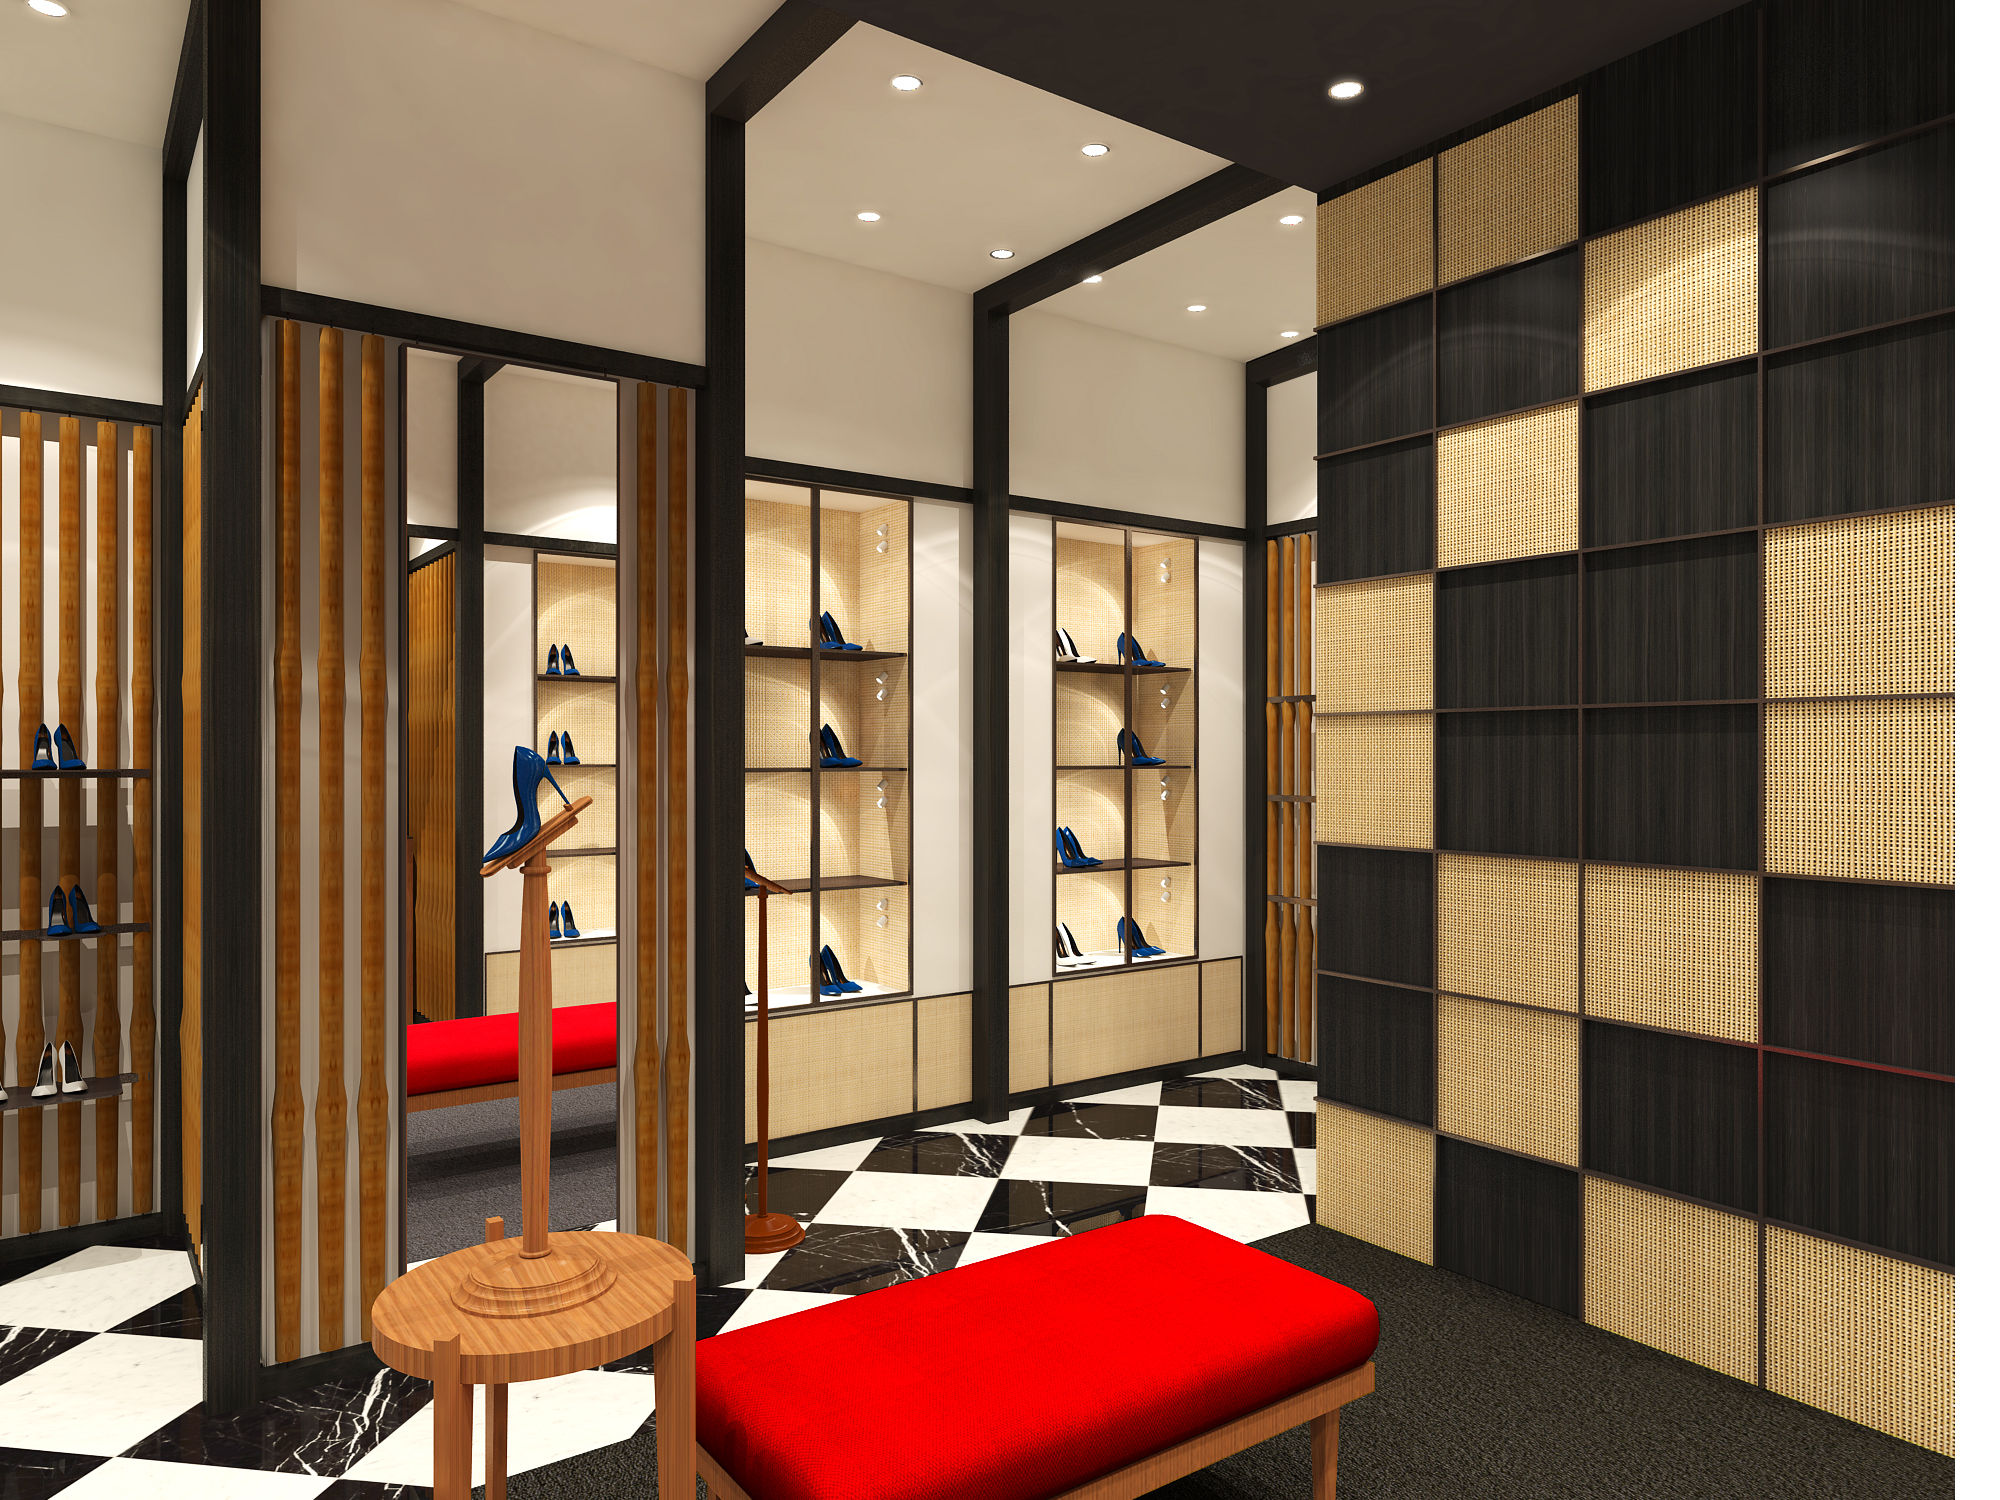 Manolo Blahnik opens first standalone Singapore boutique at Marina Bay Sands